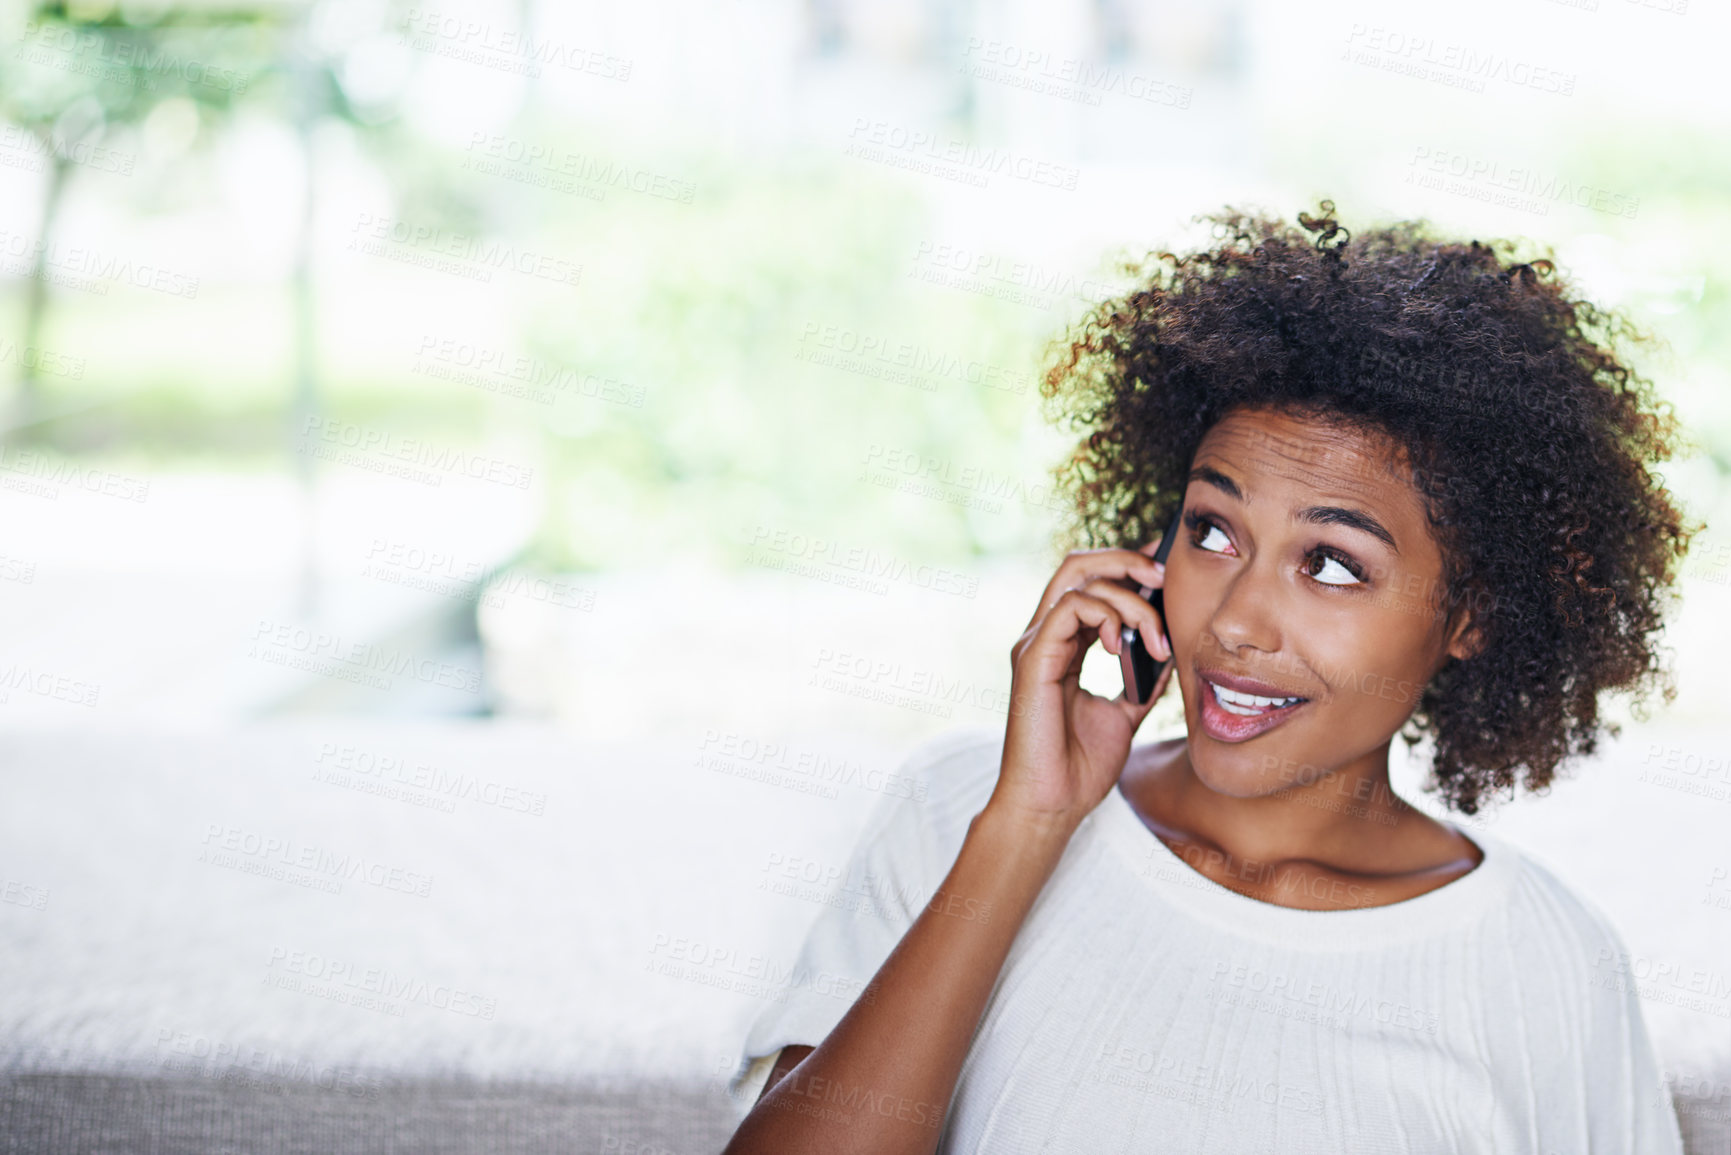 Buy stock photo Face, surprise phone call and black woman in living room of home with space for communication or networking. Contact, news and reaction with expression of young person talking on mobile in apartment